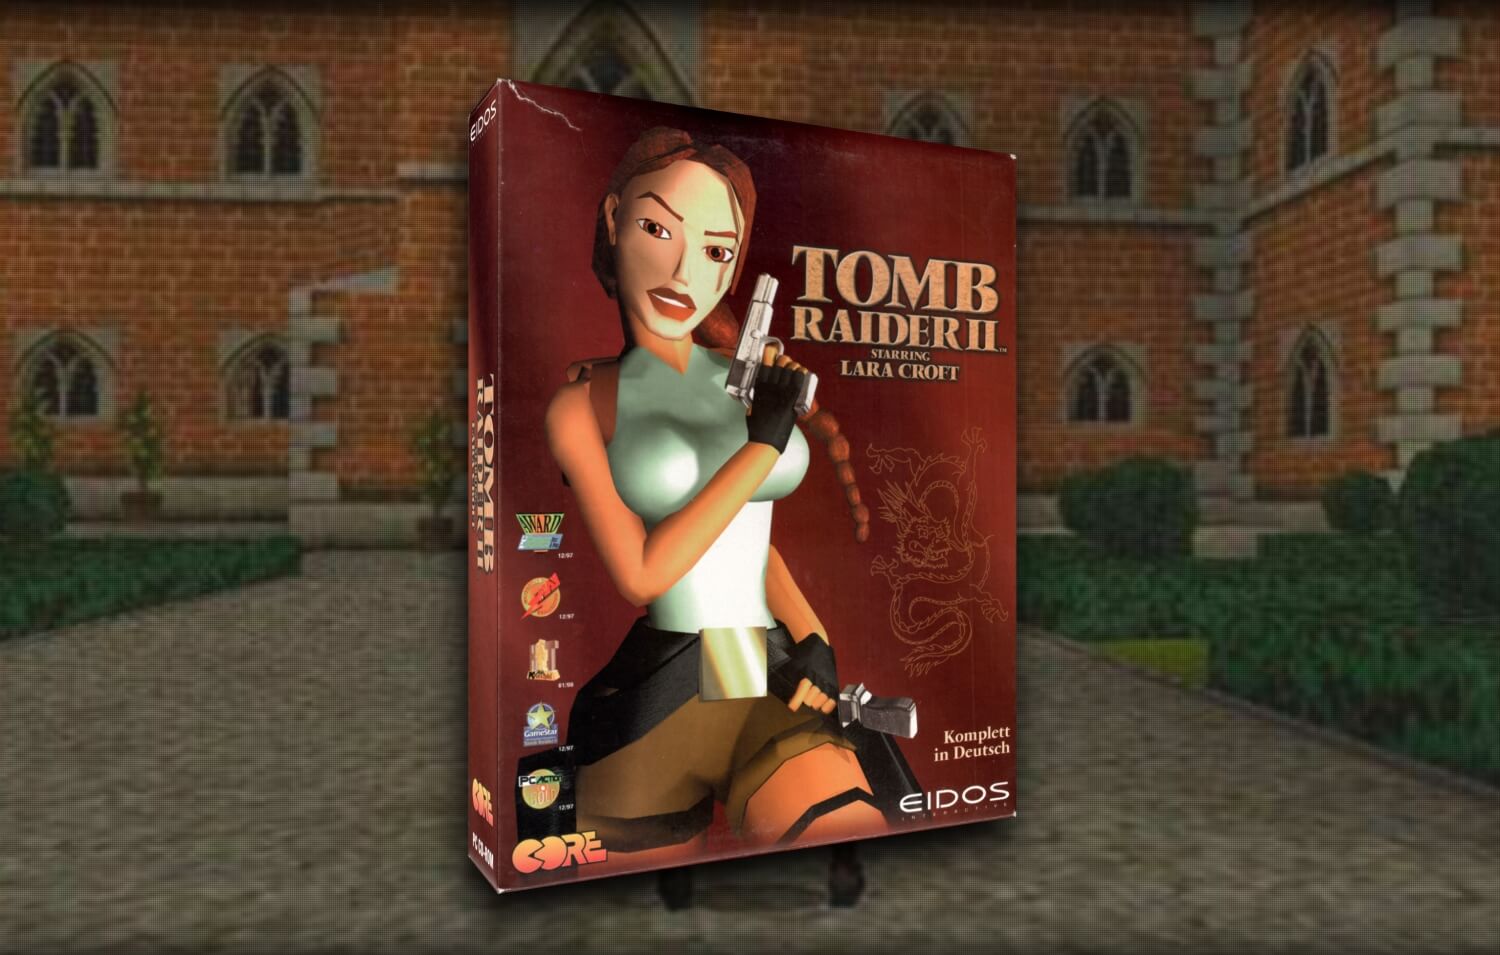 Take a trip down memory lane with this virtual collection of big box PC games